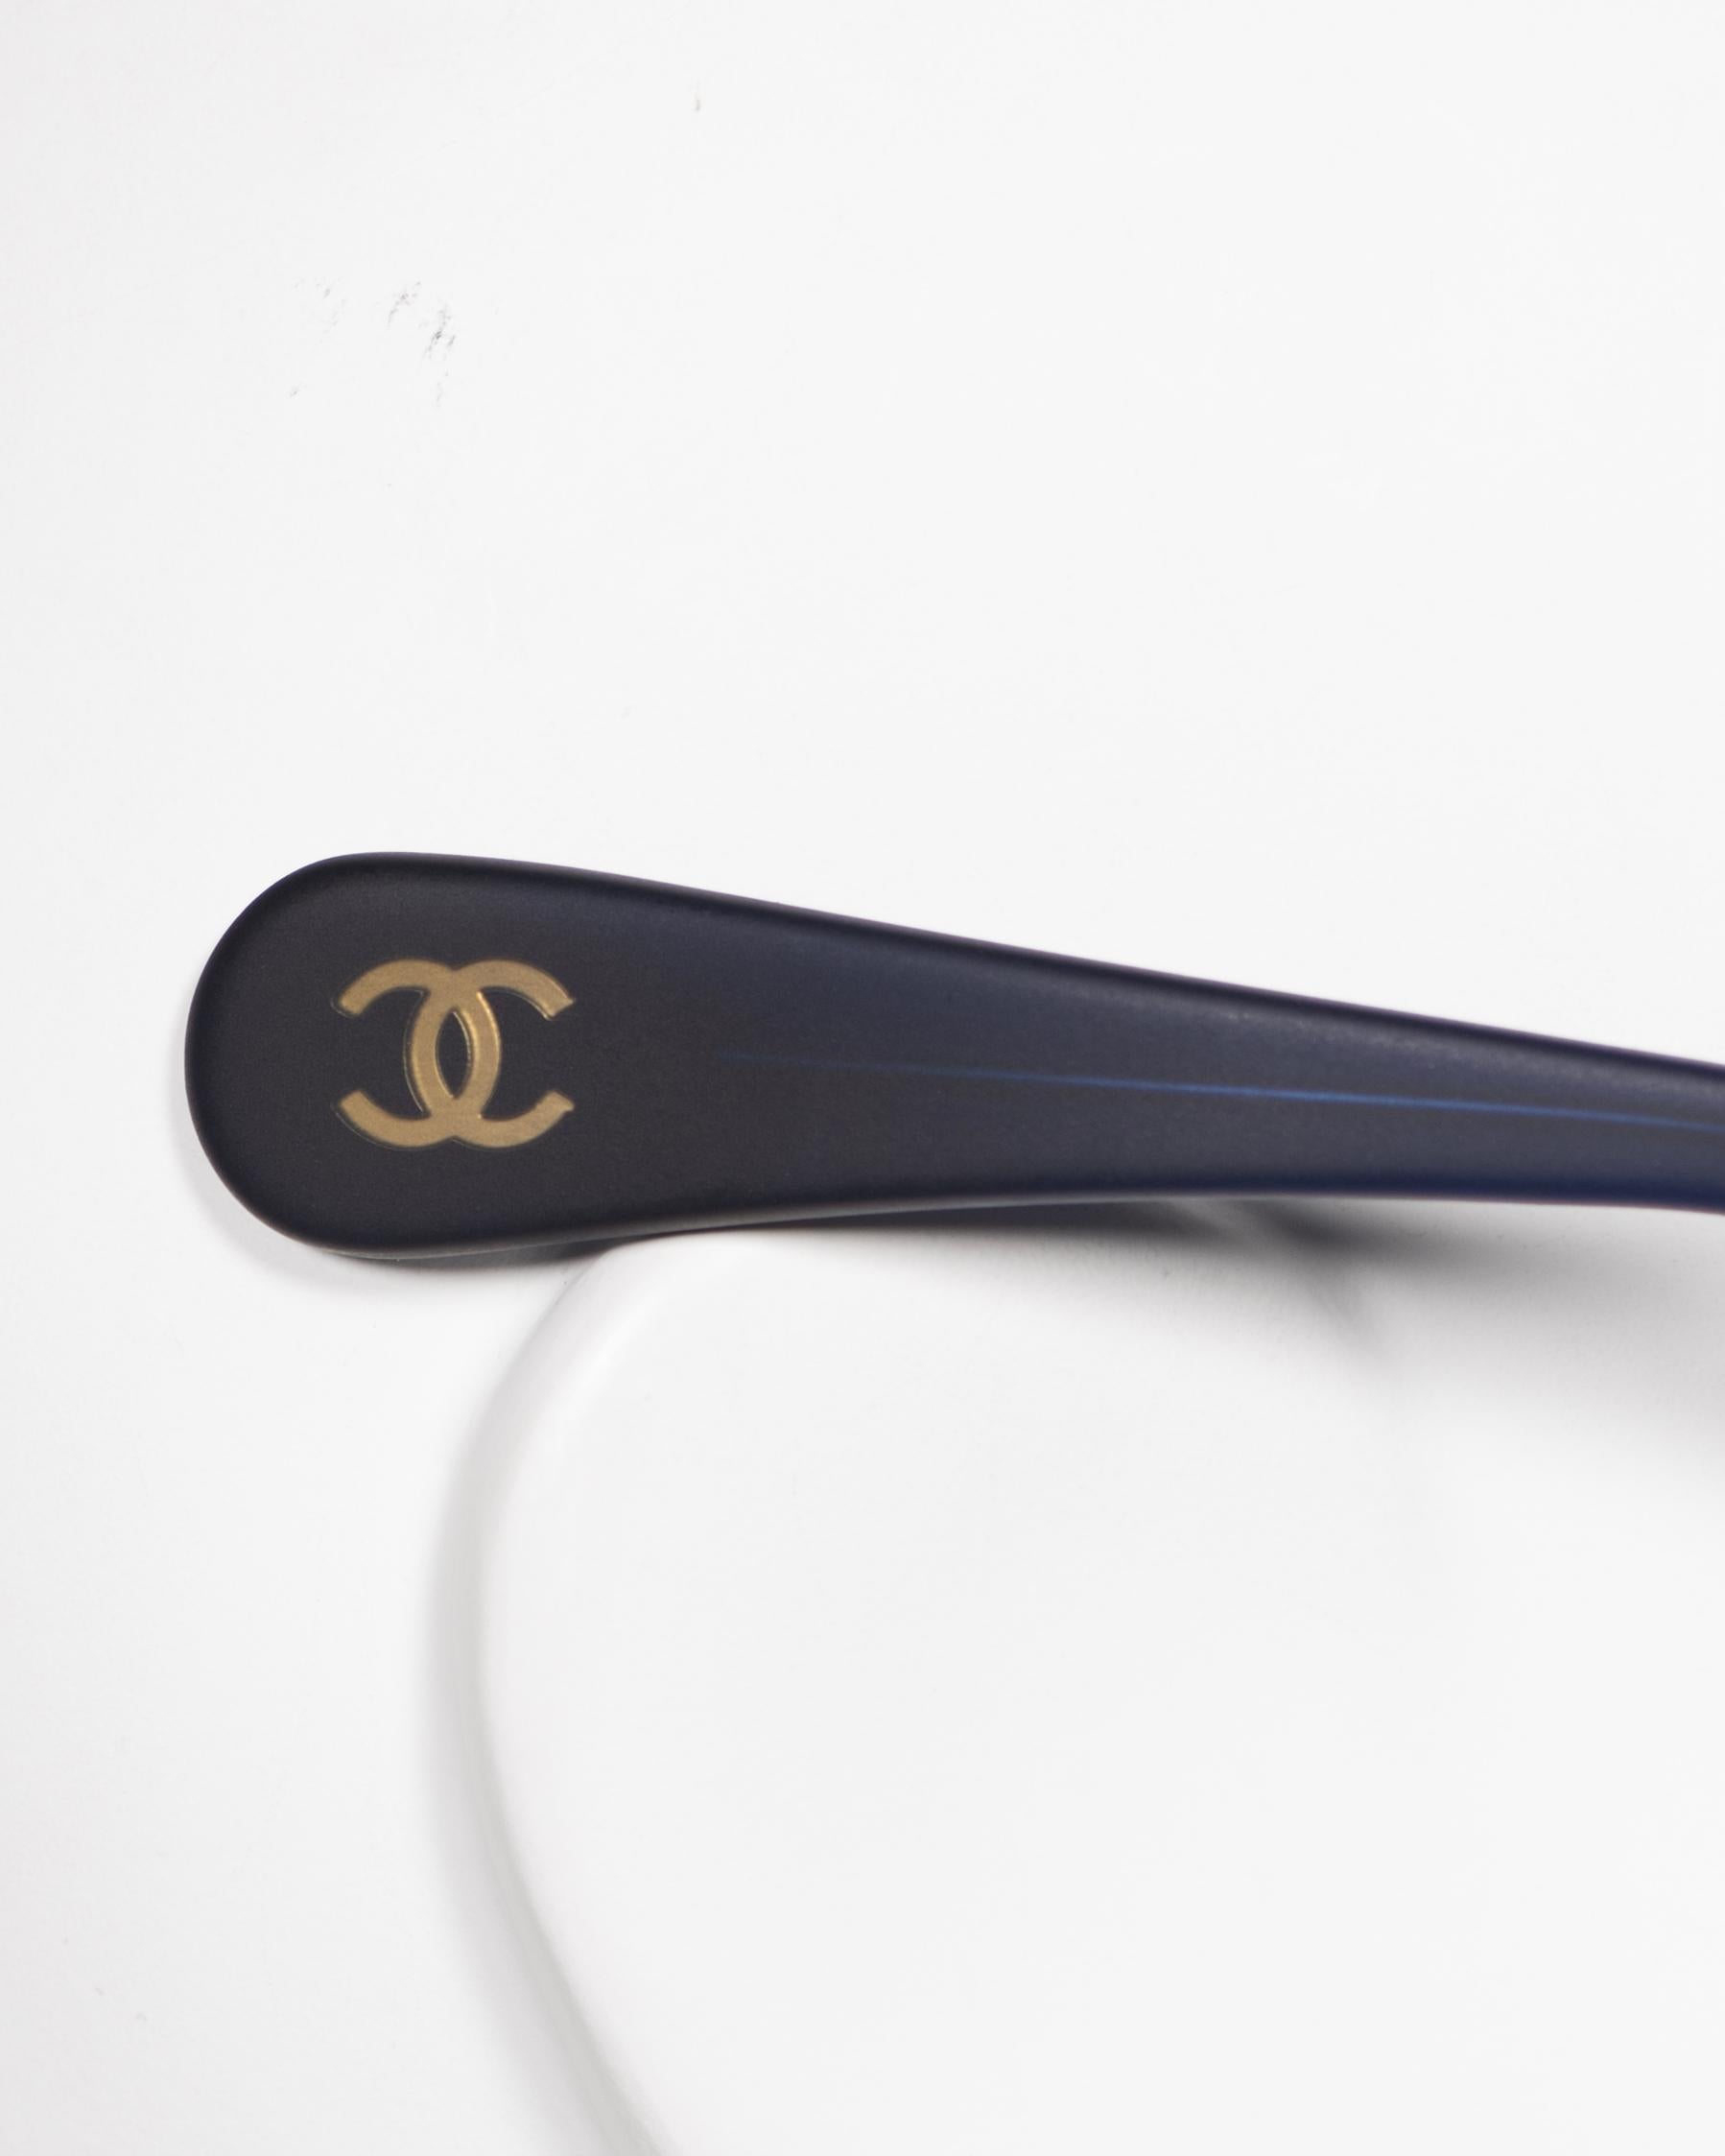 Chanel by Karl Lagerfeld Blue Monolens Sunglasses, ss 2001 4